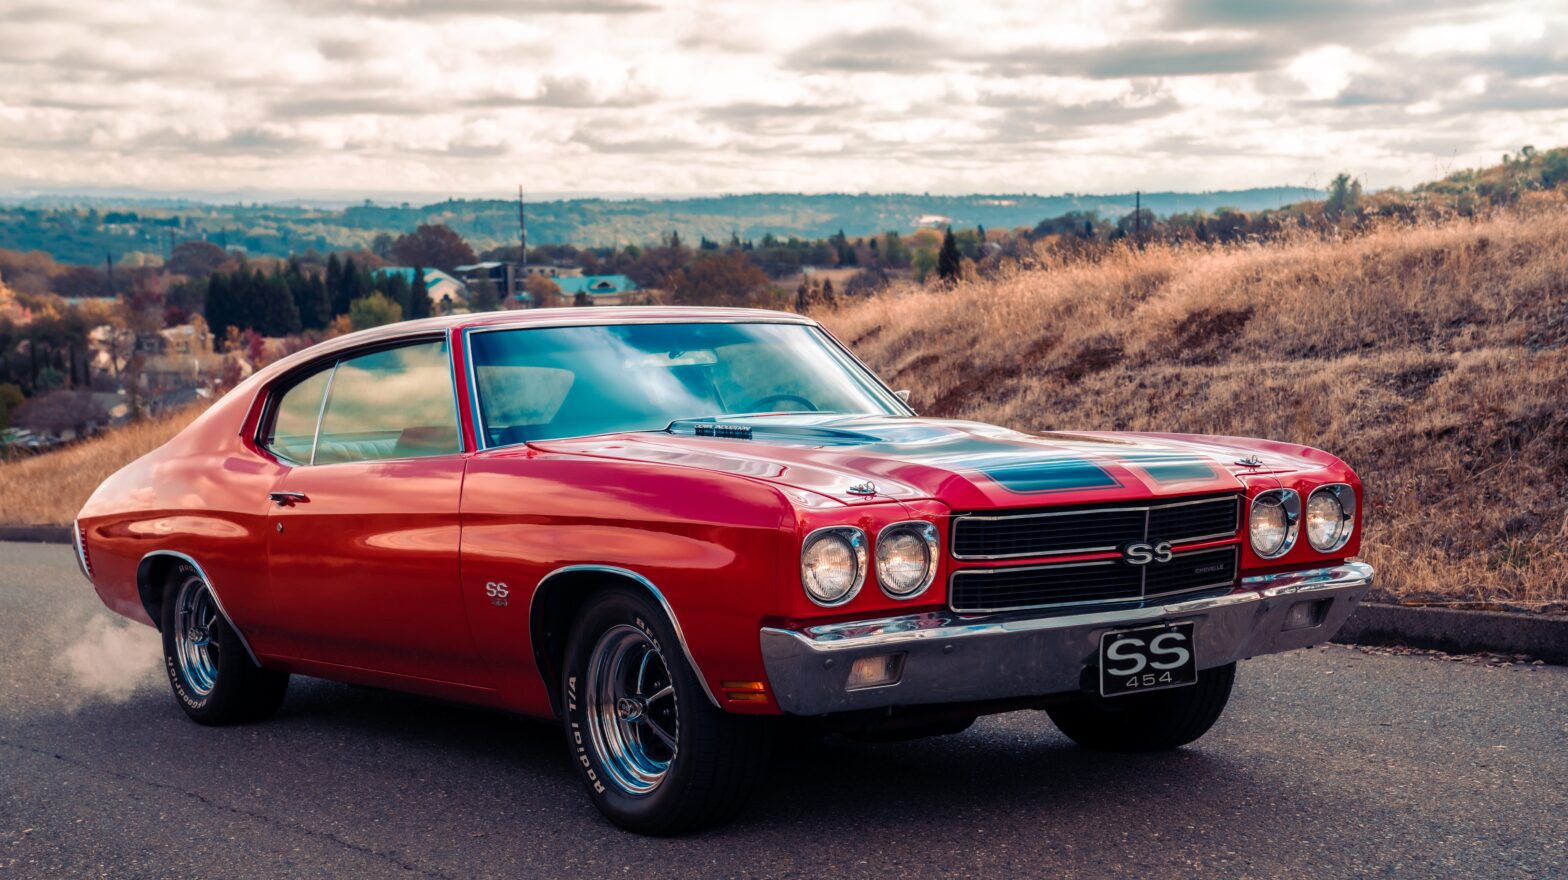 LizardSkin Sound Control: Enhancing the 1970 Chevrolet Chevelle SS